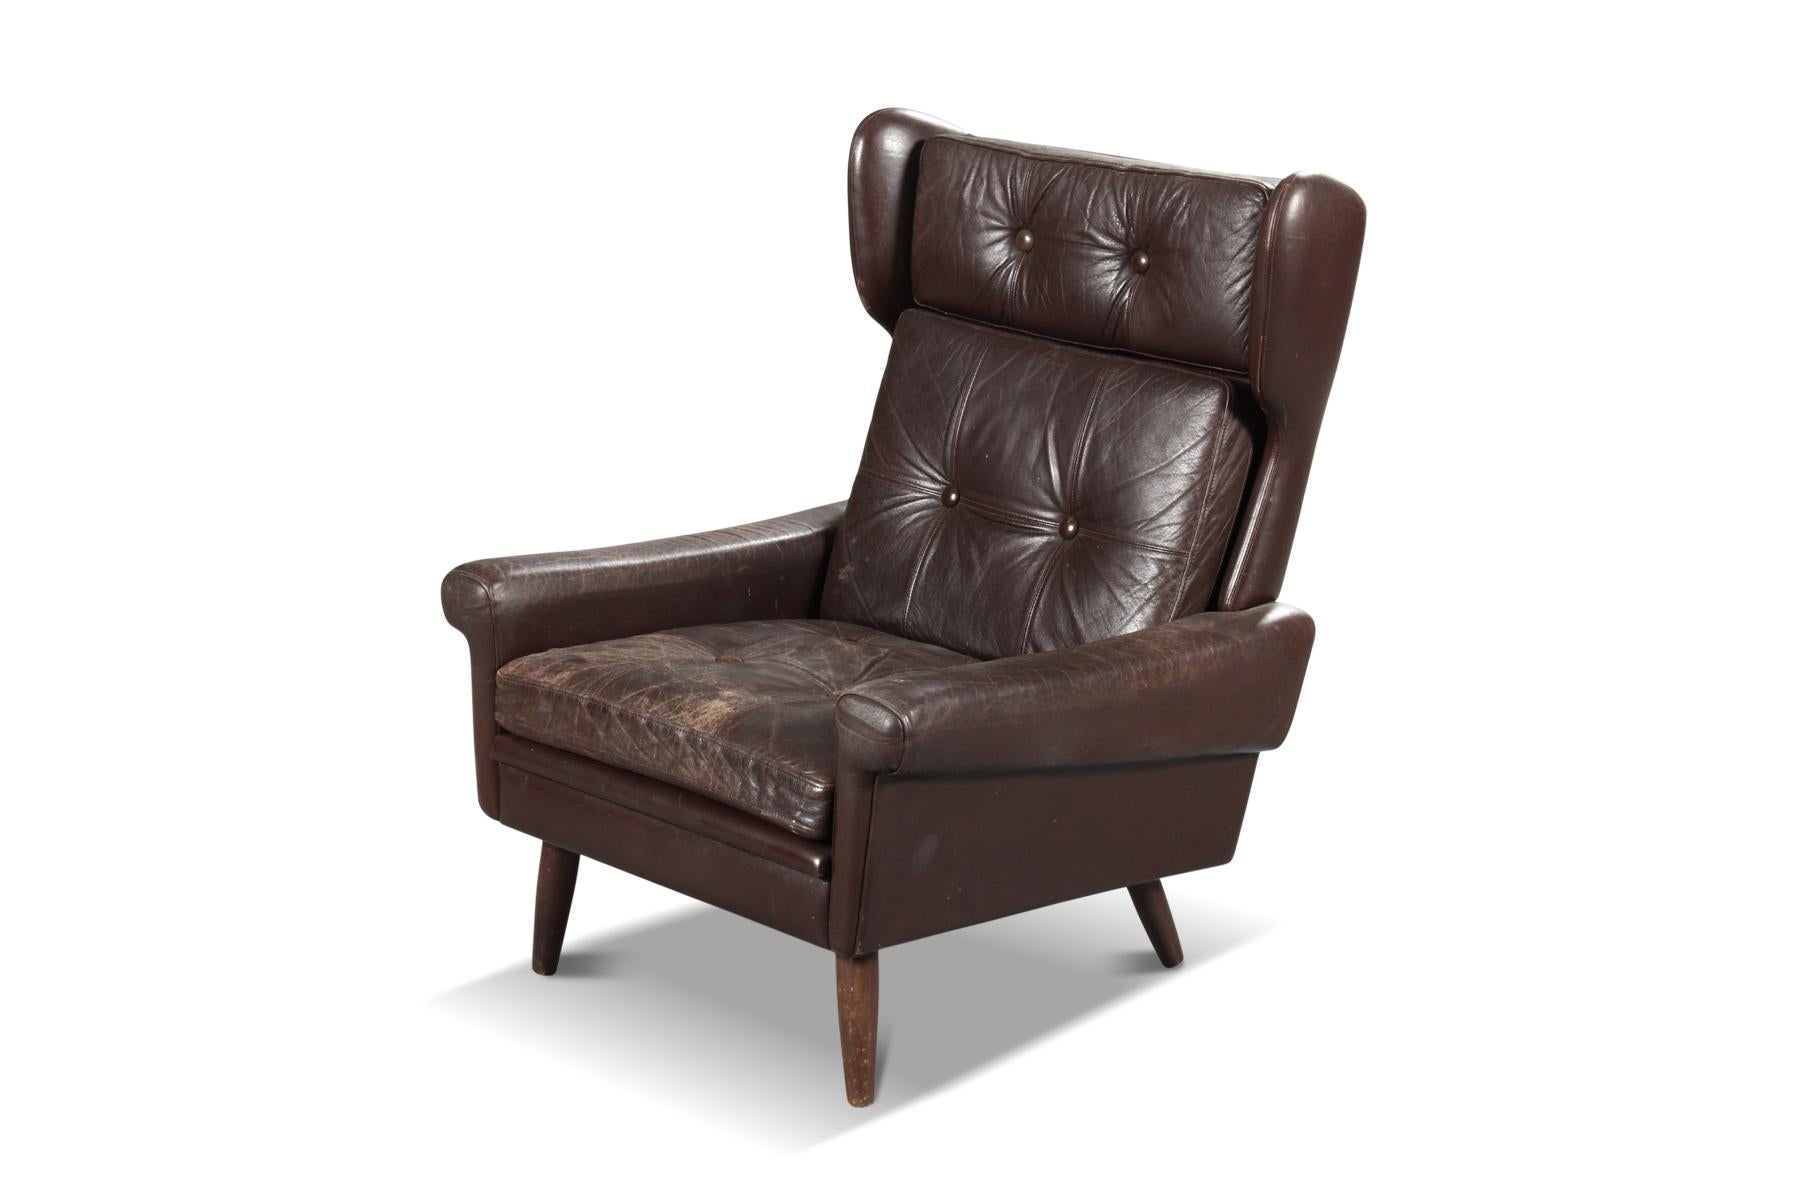 Svend Skipper Highback Lounge Chair in Patinated Brown Leather In Excellent Condition For Sale In Berkeley, CA